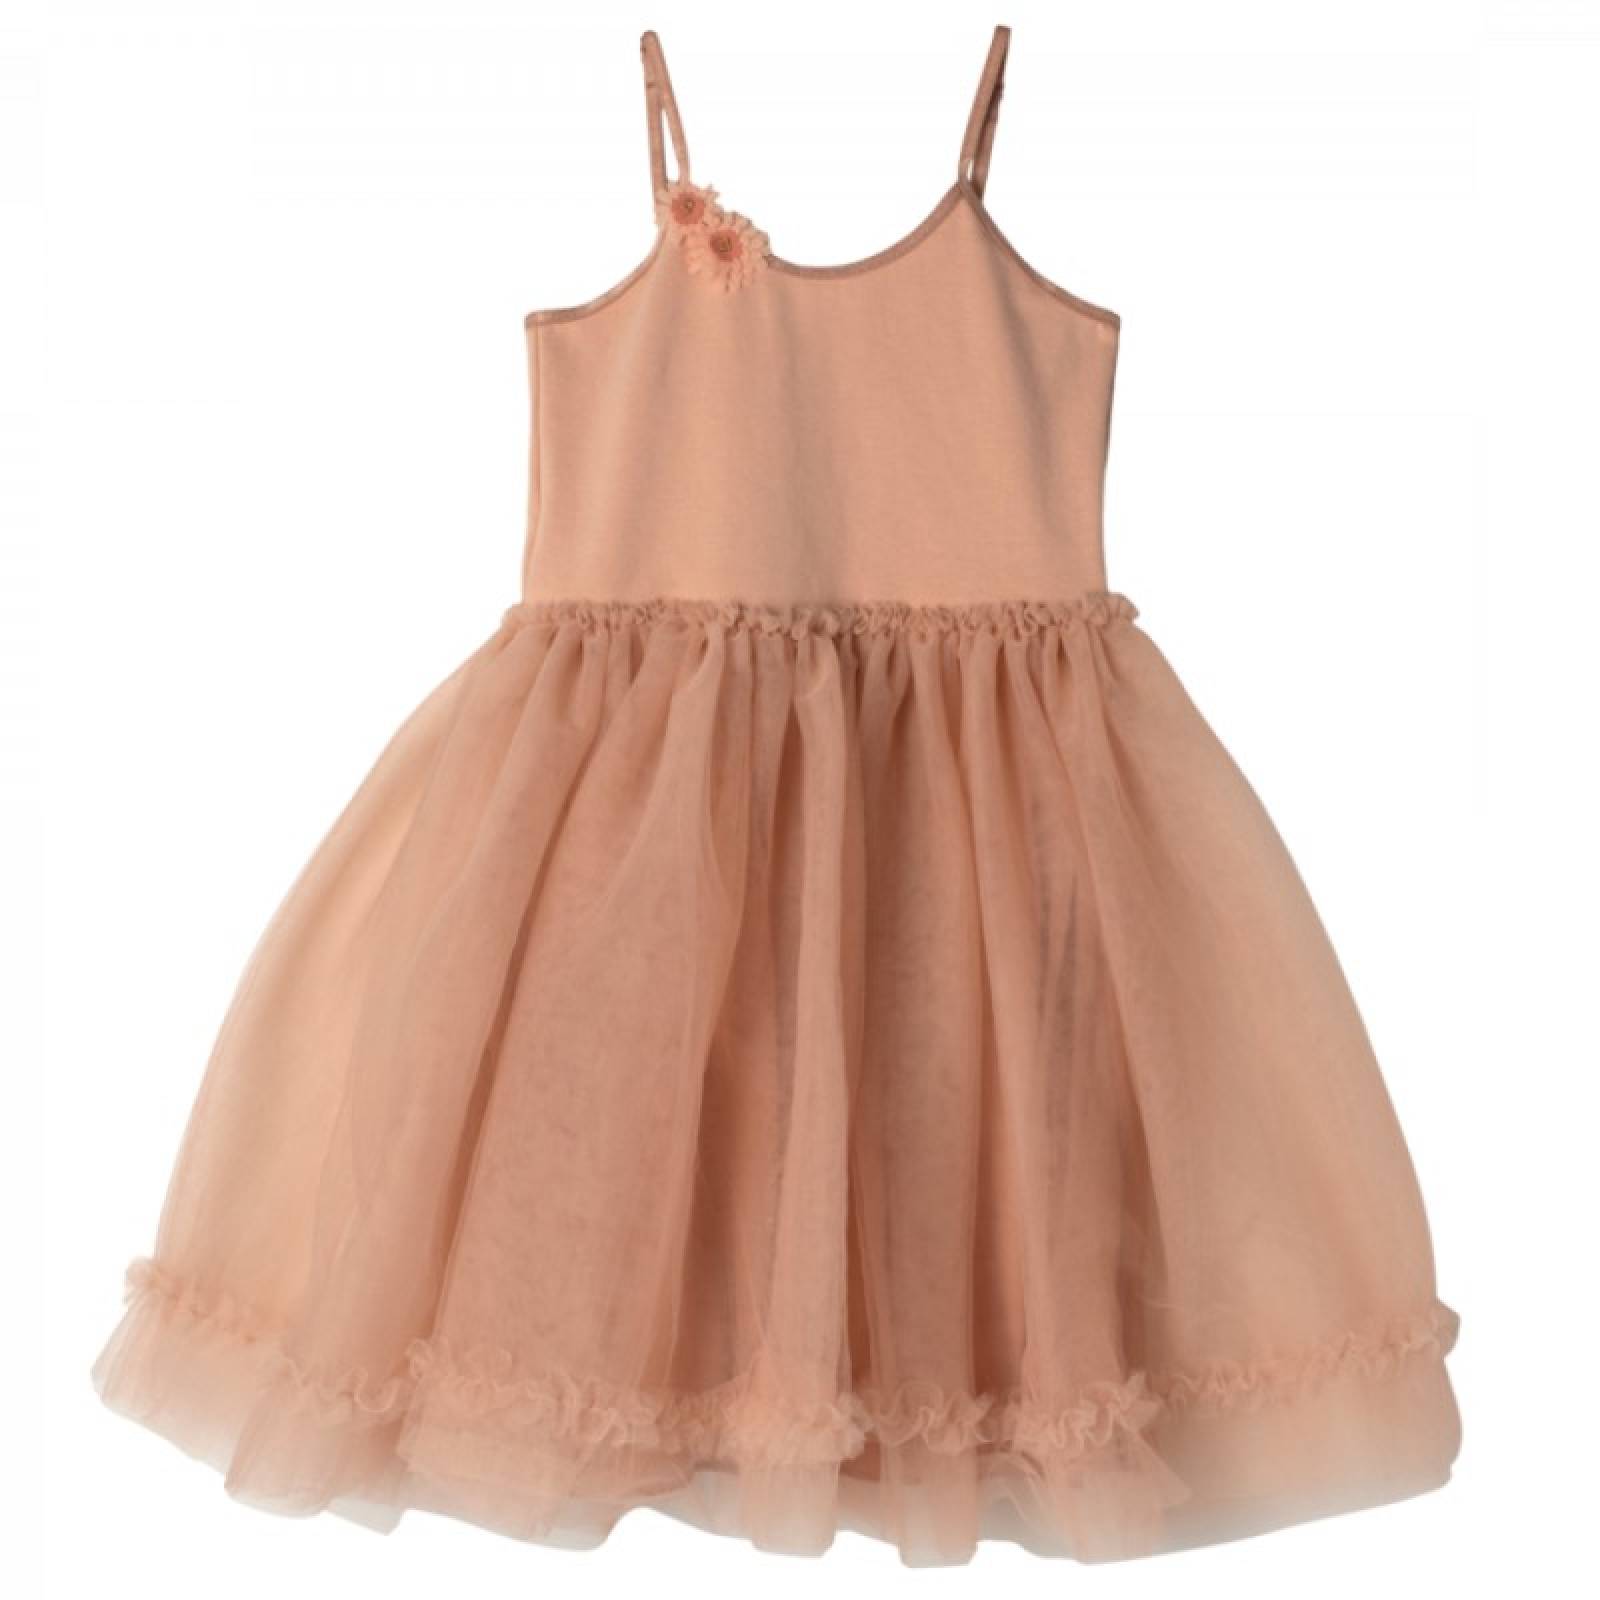 Children's Princess Tulle Dress In Melon By Maileg 2-3yrs thumbnails